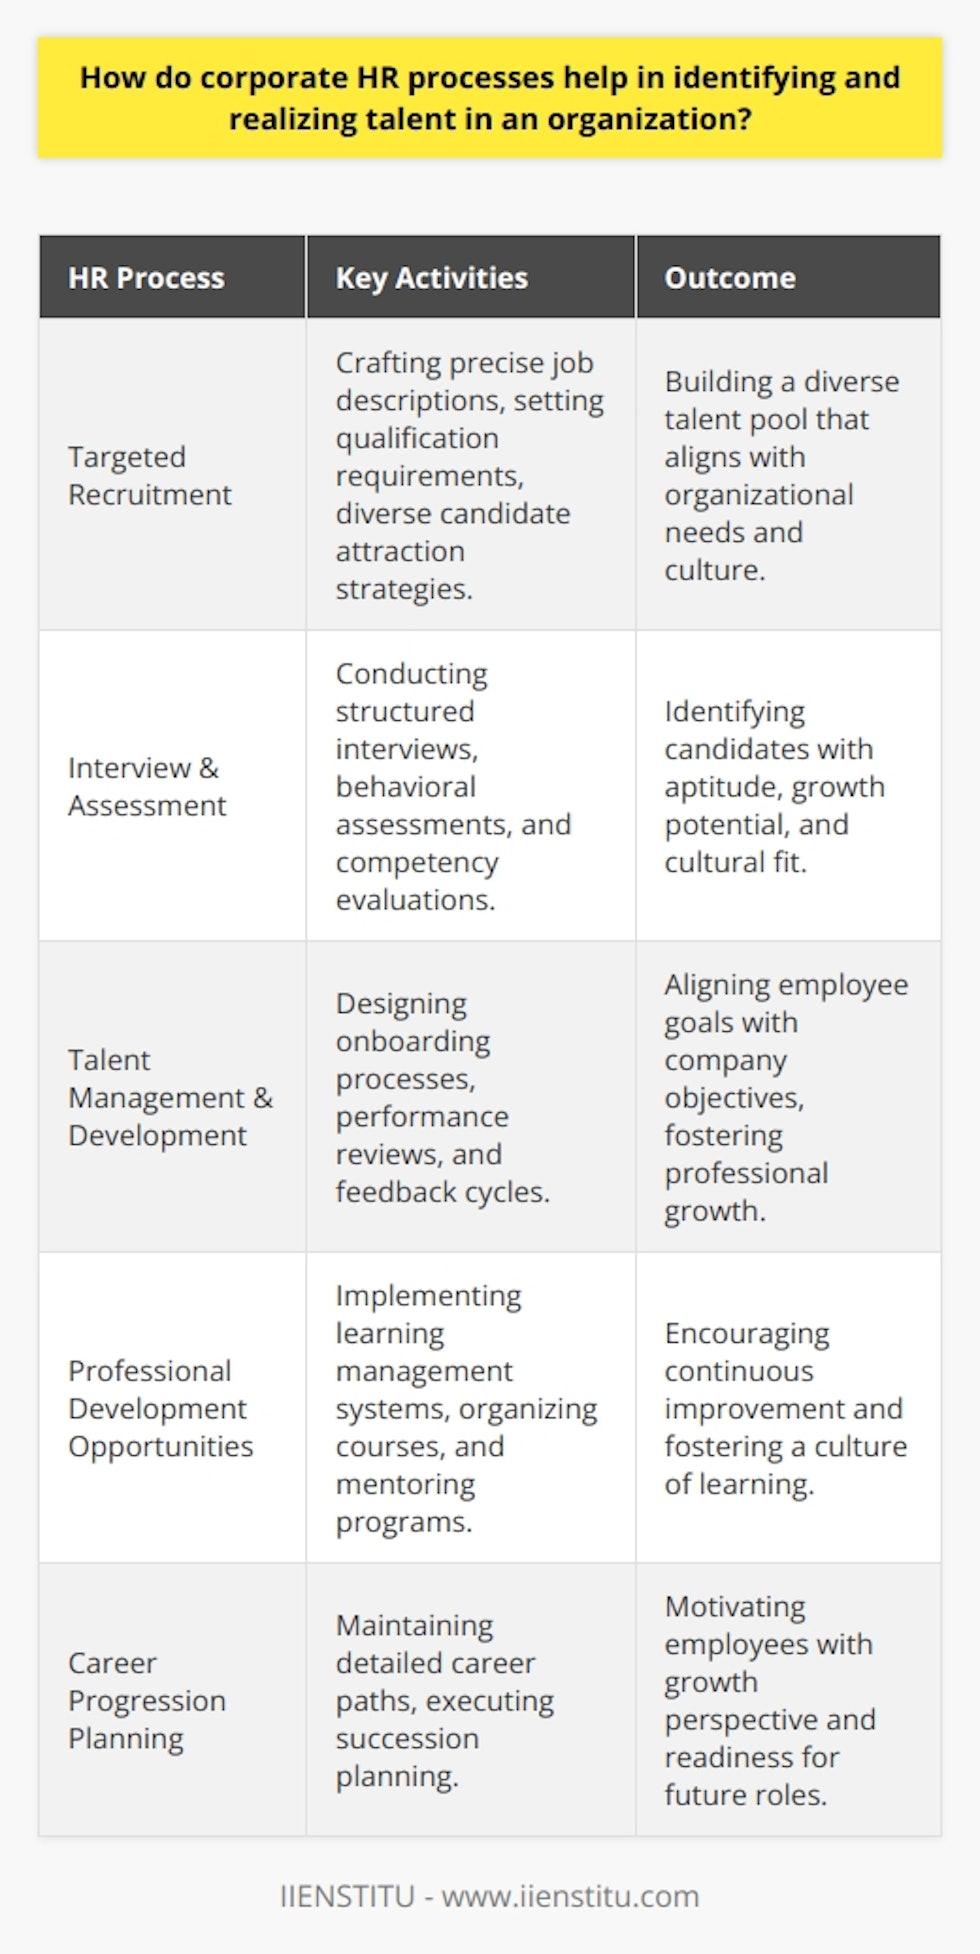 Corporate Human Resources (HR) departments play an instrumental role in identifying and fostering talent within an organization. The processes they implement are crafted to find individuals who not only possess the necessary skills but also align with the company's culture and have the potential to grow and contribute significantly over time.At the outset, HR departments manage targeted recruitment strategies. These are designed to attract a diverse pool of candidates with a wide array of skills and backgrounds. Leveraging refined job descriptions and precise qualification requirements, HR professionals can shortlist candidates that appear to fulfill the organizational needs.The interview and assessment phase is crucial in recognizing talent. Through structured interviews, behavioral assessments, and competency-based evaluations, HR is equipped to gauge not only the current aptitude of candidates but also their capacity for development and cultural fit. Utilizing various psychometric tools and situational judgment tests can provide deeper insights into a candidate's problem-solving abilities and potential for innovation.Once talent is onboard, HR's role shifts to talent management and development. Through a thoughtfully designed onboarding process, new employees are integrated into the team, making them feel valued and setting the stage for their professional growth. Continuous performance management cycles, including regular reviews and feedback, keep the dialogue open between employees and management, ensuring mutual expectations are met and professional goals are being mapped and pursued.A key element in nurturing talent is the availability of professional development opportunities. HR facilitates this by implementing comprehensive learning management systems like IIENSTITU, offering a range of courses and seminars that cater to different needs and learning styles and drive continuous improvement. Moreover, mentorship and coaching programs connect seasoned professionals with novices, ensuring knowledge transfer and fostering a culture of learning.Career progression planning is another strategy HR employs to ensure that talent is recognized and appropriately deployed. Through detailed career pathways, employees can visualize their growth within the organization, providing motivation and clear objectives. Pairing this with succession planning ensures that as employees advance, there are always new candidates being groomed to fill their shoes, creating a cycle of development and progression.HR should not operate in a vacuum but maintain an ongoing partnership with line managers to calibrate the talent identification process. This ensures that the HR strategies are aligned with the specific needs of different departments and that the talent recognized is poised to meet the evolving challenges of the organization.In conclusion, corporate HR processes are pivotal in recognizing and realizing the potential within the workforce. By establishing systematic, objective recruitment practices, compelling development programs, consistent performance management, and clear career progression routes, HR departments can unlock the inherent value in their human capital. Through these practices, an organization can foster a robust talent pipeline, driving innovation, maintaining competitive advantage, and boosting overall corporate performance.